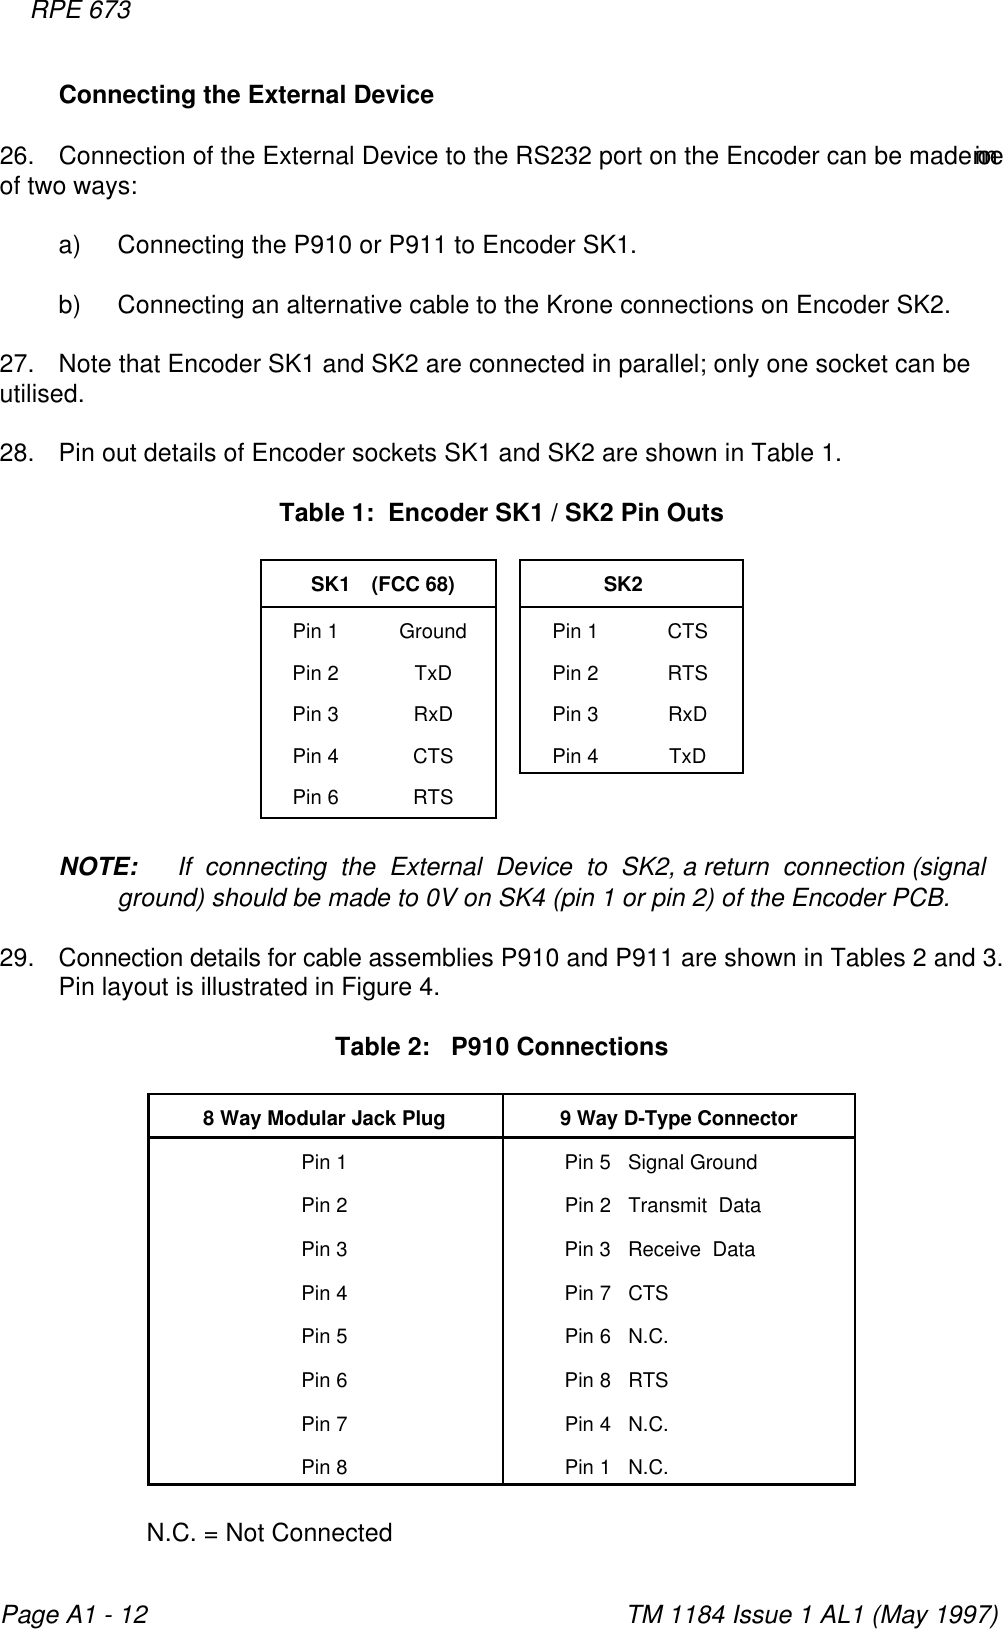 RPE 673    TM 1184 Issue 1 AL1 (May 1997)Page A1 - 12Connecting the External Device26. Connection of the External Device to the RS232 port on the Encoder can be madein on eof two ways:a) Connecting the P910 or P911 to Encoder SK1.b) Connecting an alternative cable to the Krone connections on Encoder SK2.27. Note that Encoder SK1 and SK2 are connected in parallel; only one socket can be utilised. 28. Pin out details of Encoder sockets SK1 and SK2 are shown in Table 1.Table 1:  Encoder SK1 / SK2 Pin Outs           SK1   (FCC 68)      SK2Pin 1 Ground Pin 1 CTSPin 2 TxD Pin 2 RTSPin 3 RxD Pin 3 RxDPin 4 CTS Pin 4 TxDPin 6 RTSNOTE: If  connecting  the  External  Device  to  SK2, a return  connection (signal ground) should be made to 0V on SK4 (pin 1 or pin 2) of the Encoder PCB.29. Connection details for cable assemblies P910 and P911 are shown in Tables 2 and 3.Pin layout is illustrated in Figure 4.Table 2:   P910 Connections8 Way Modular Jack Plug 9 Way D-Type ConnectorPin 1            Pin 5   Signal Ground Pin 2            Pin 2   Transmit  Data  Pin 3            Pin 3   Receive  Data Pin 4            Pin 7   CTS              Pin 5            Pin 6   N.C.              Pin 6            Pin 8   RTS              Pin 7            Pin 4   N.C.             Pin 8            Pin 1   N.C.       N.C. = Not Connected